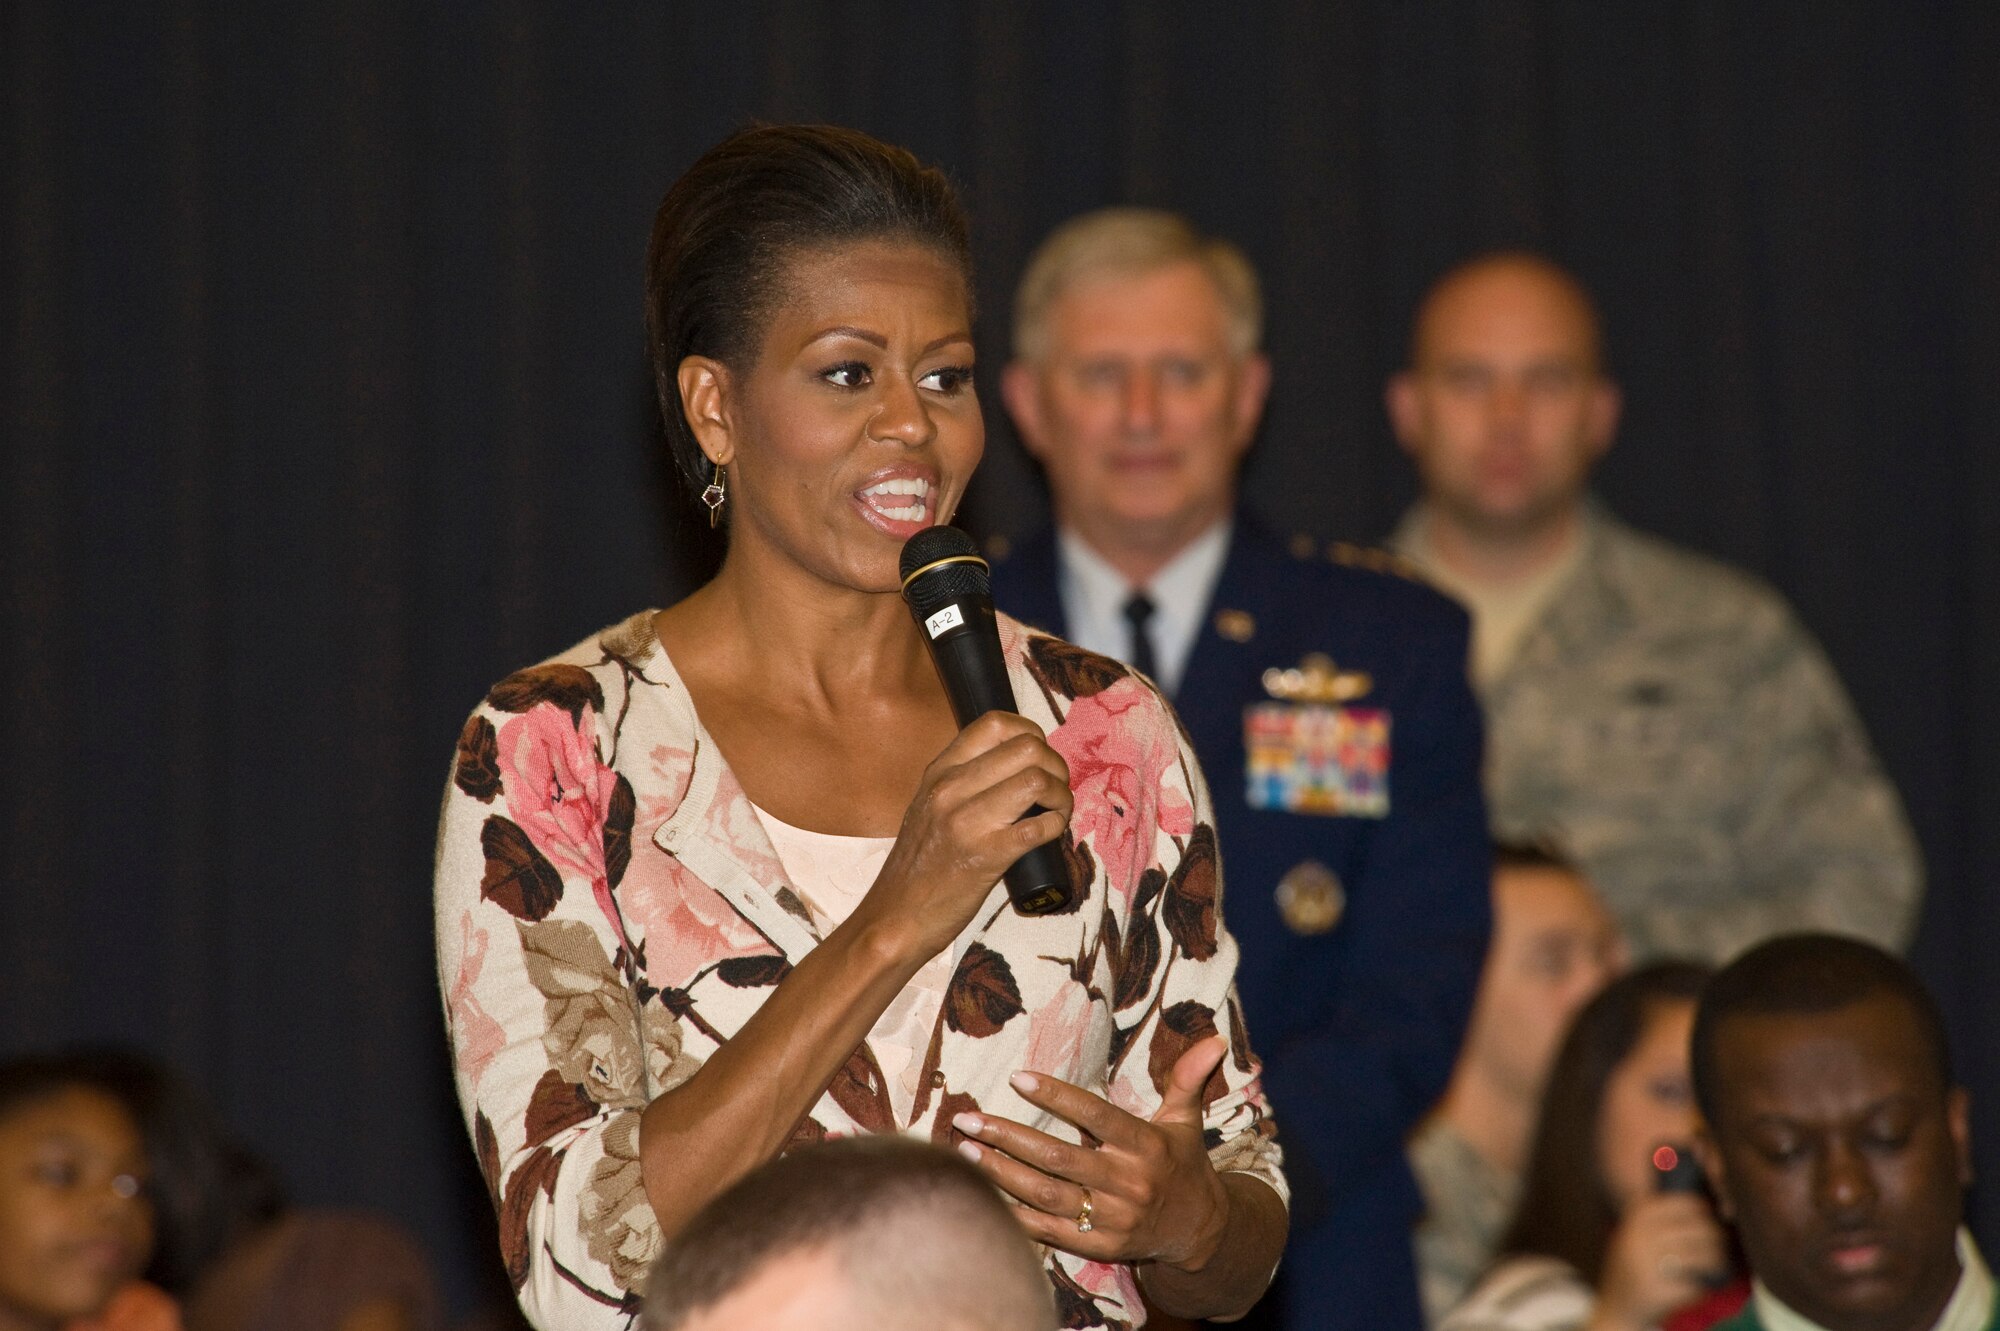 First Lady Michelle Obama talks to servicemembers and their families during a Veterans Day dinner at the Officers Club on Ramstein Air Base, Germany, Nov. 11, 2010. The First Lady made a surprise visit to Ramstein during her return from a nine-day tour of Asia to show her support for servicemembers and their families during this Veterans Day. She met with wounded servicemembers at Landstuhl Regional Medical Center, served lunch, talked briefly to the servicemembers and families and met with German first lady Bettina Wulff before flying on to the United States.  (U.S. Air Force photo/Tech. Sgt. Wayne Clark) 